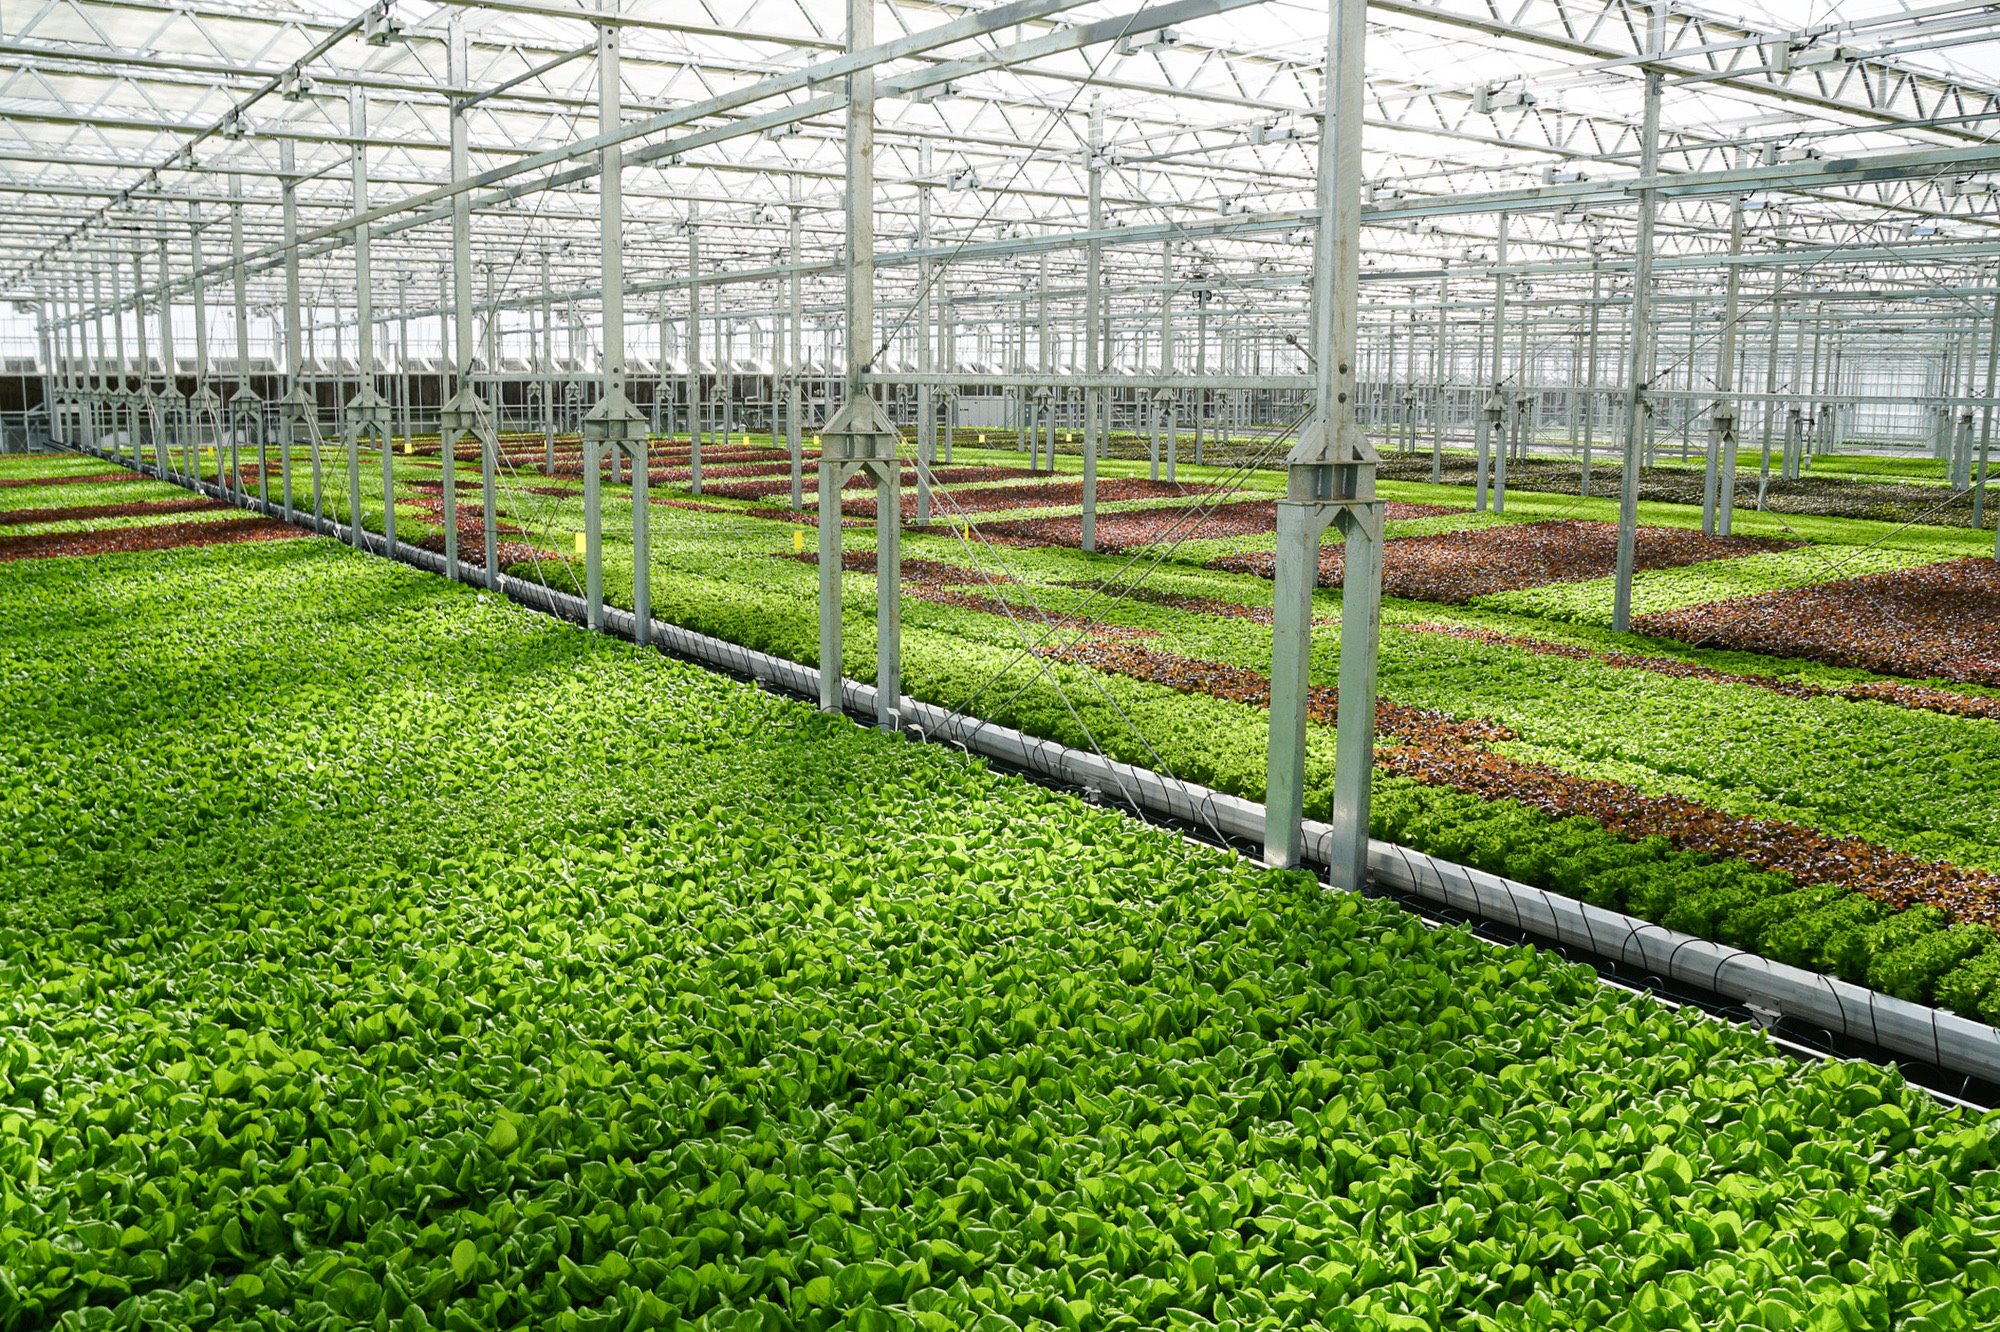 Green produce starts with green decisions. Their indoor farming facilities are sun (and wind) powered, and climate controlled for a year-round growing season. This means they can provide clean, sustainable, and quality food to their communities. Any time, anywhere.